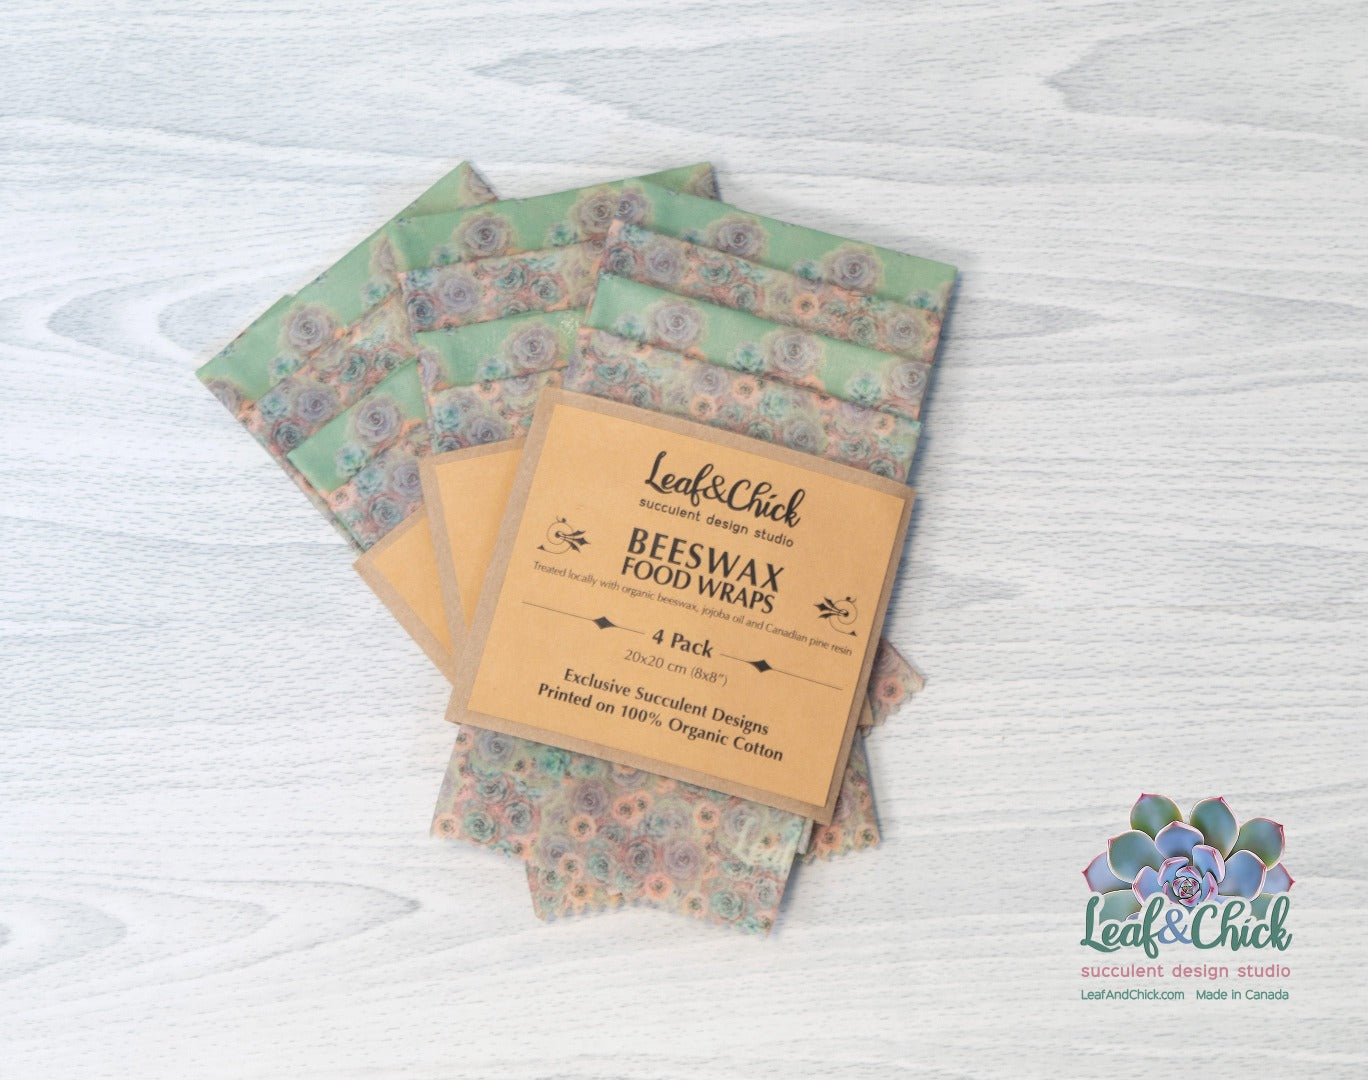 beeswax food wraps with succulent designs